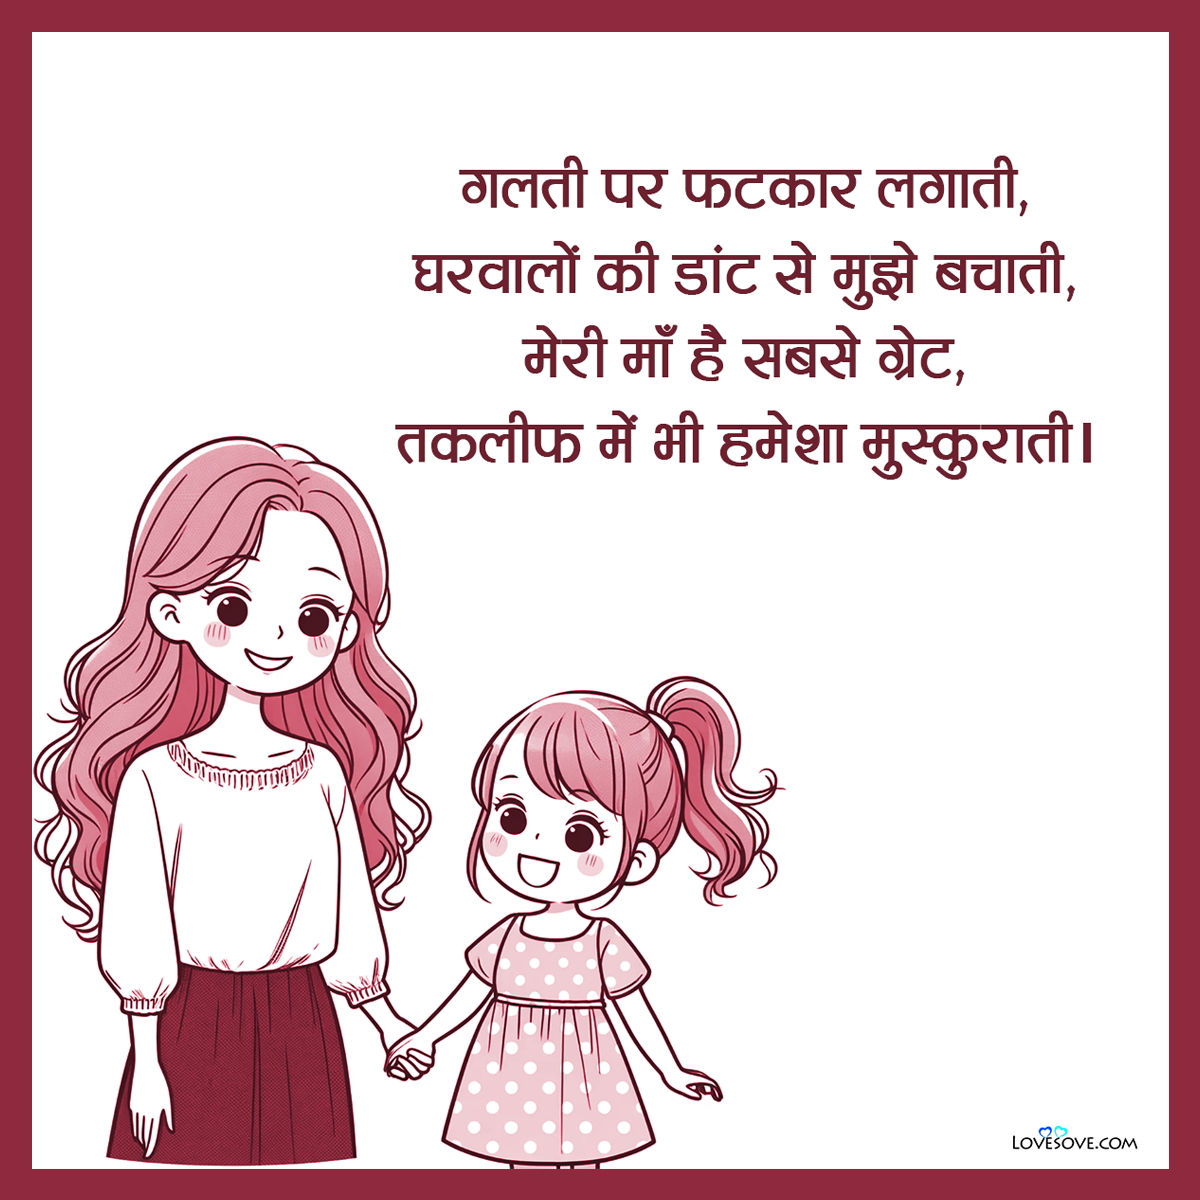 Cute Mother Daughter Quotes In Hindi, Bonding Mother Daughter Quotes In Hindi